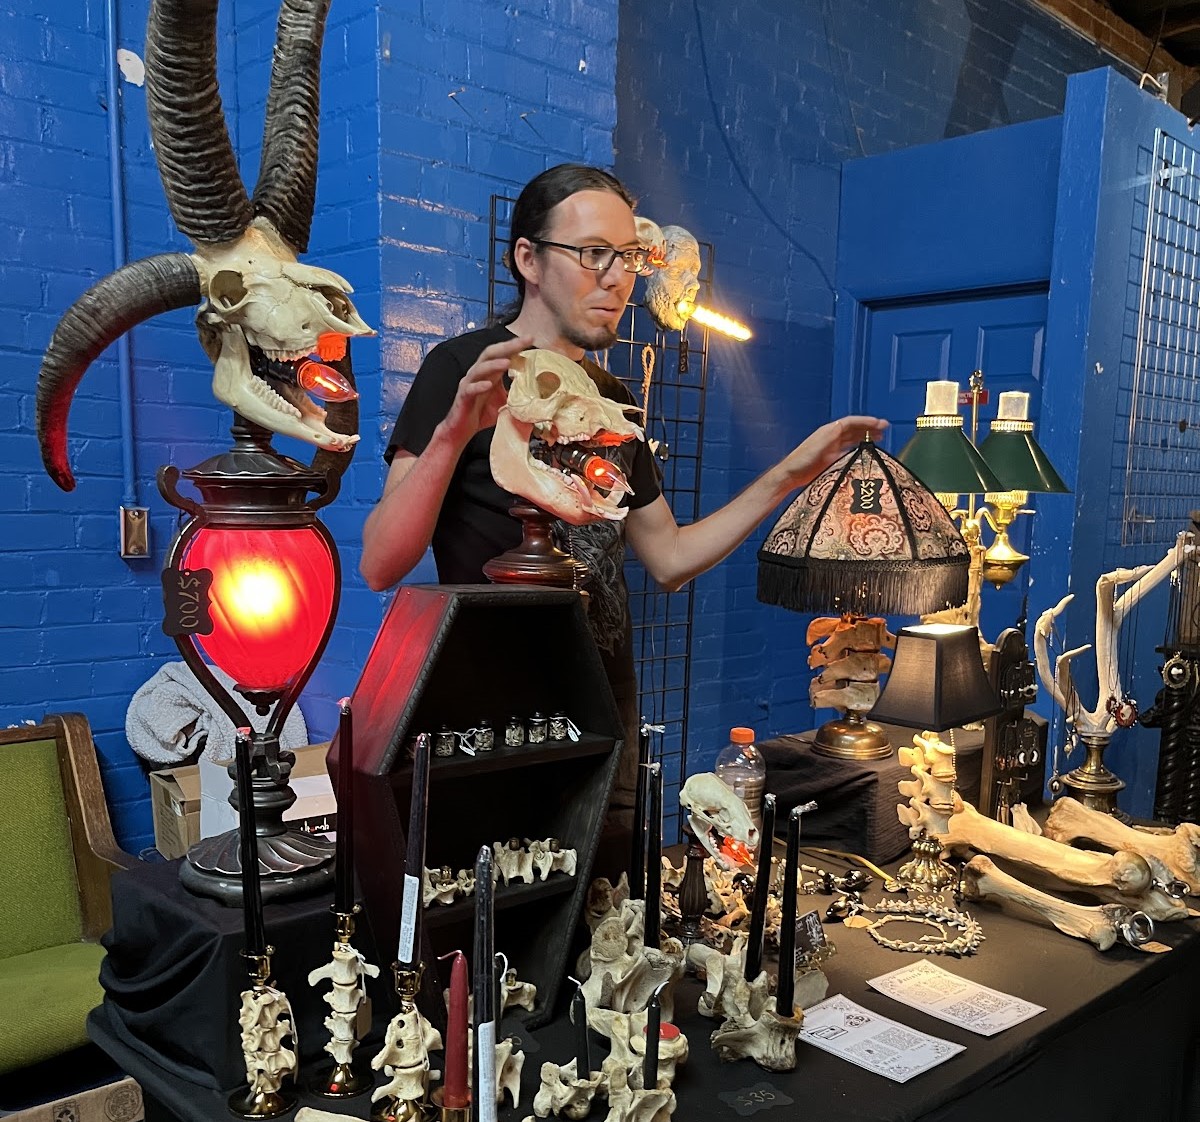 AJ ov Algol owner, AJ Kingström, sells handmade lamps, jewelry and wall decor made of bones he found in the desert at the 2023 Tucson Terrorfest convention, held at 191 E. Toole Ave.